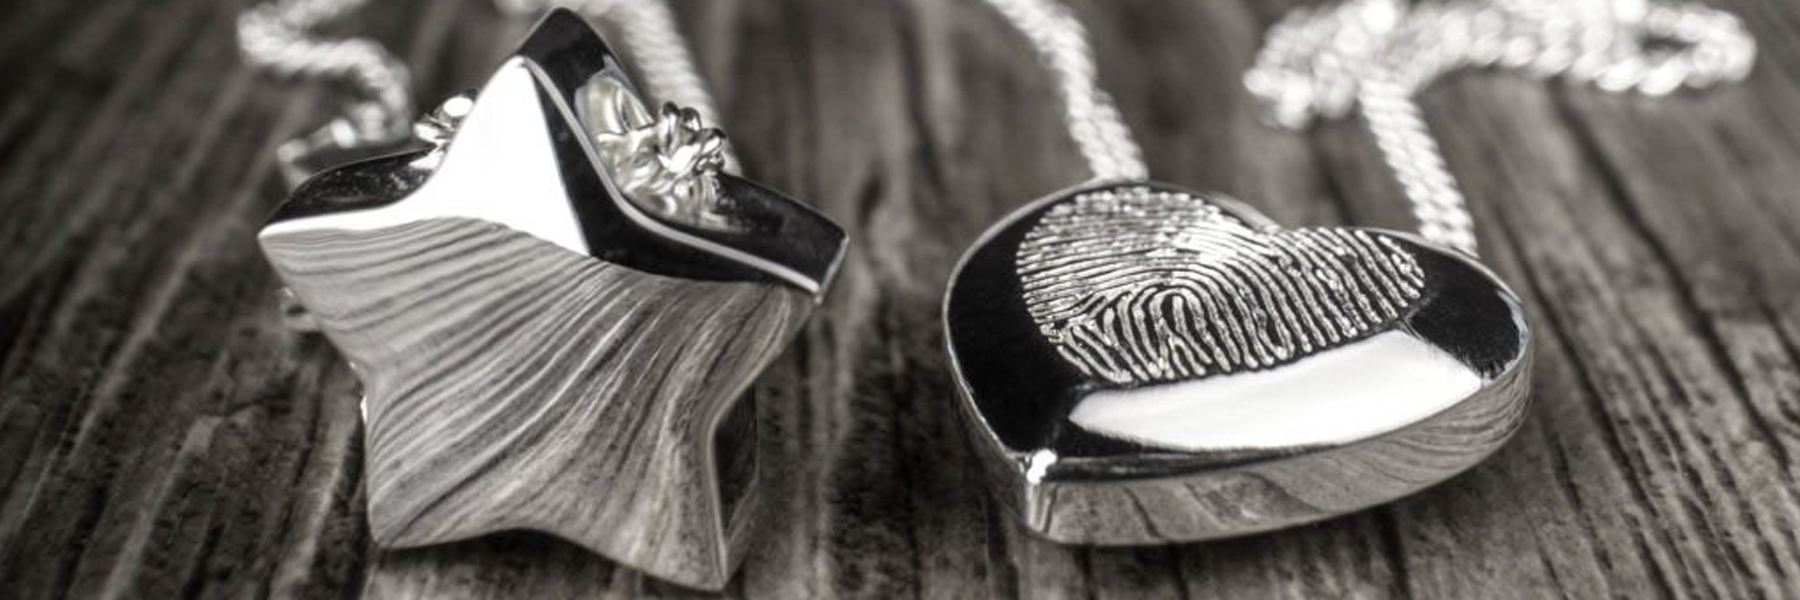 Cremation Jewelry, a very personal keepsake